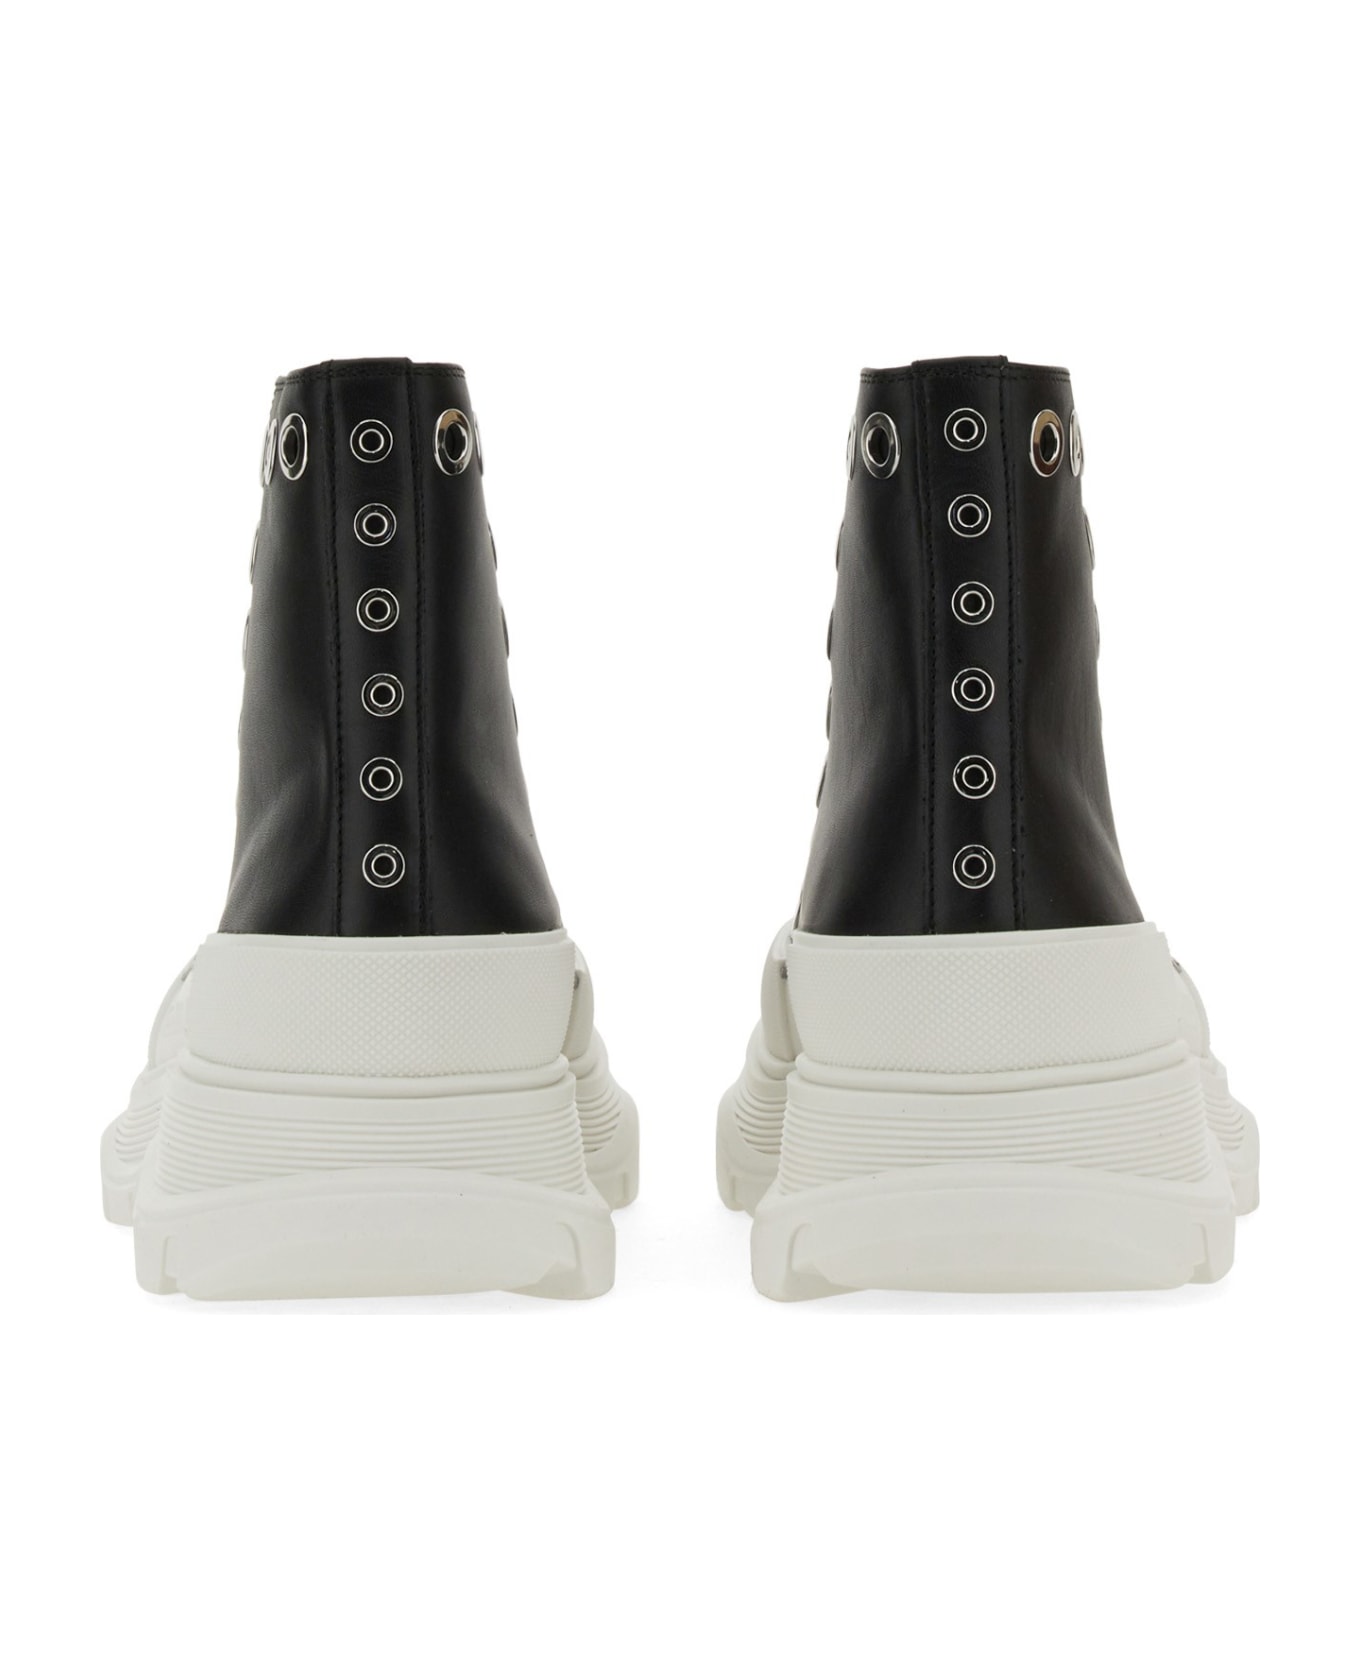 Alexander McQueen Joey Sneaker With Eyelets - Blk Of Wh Blk Sil